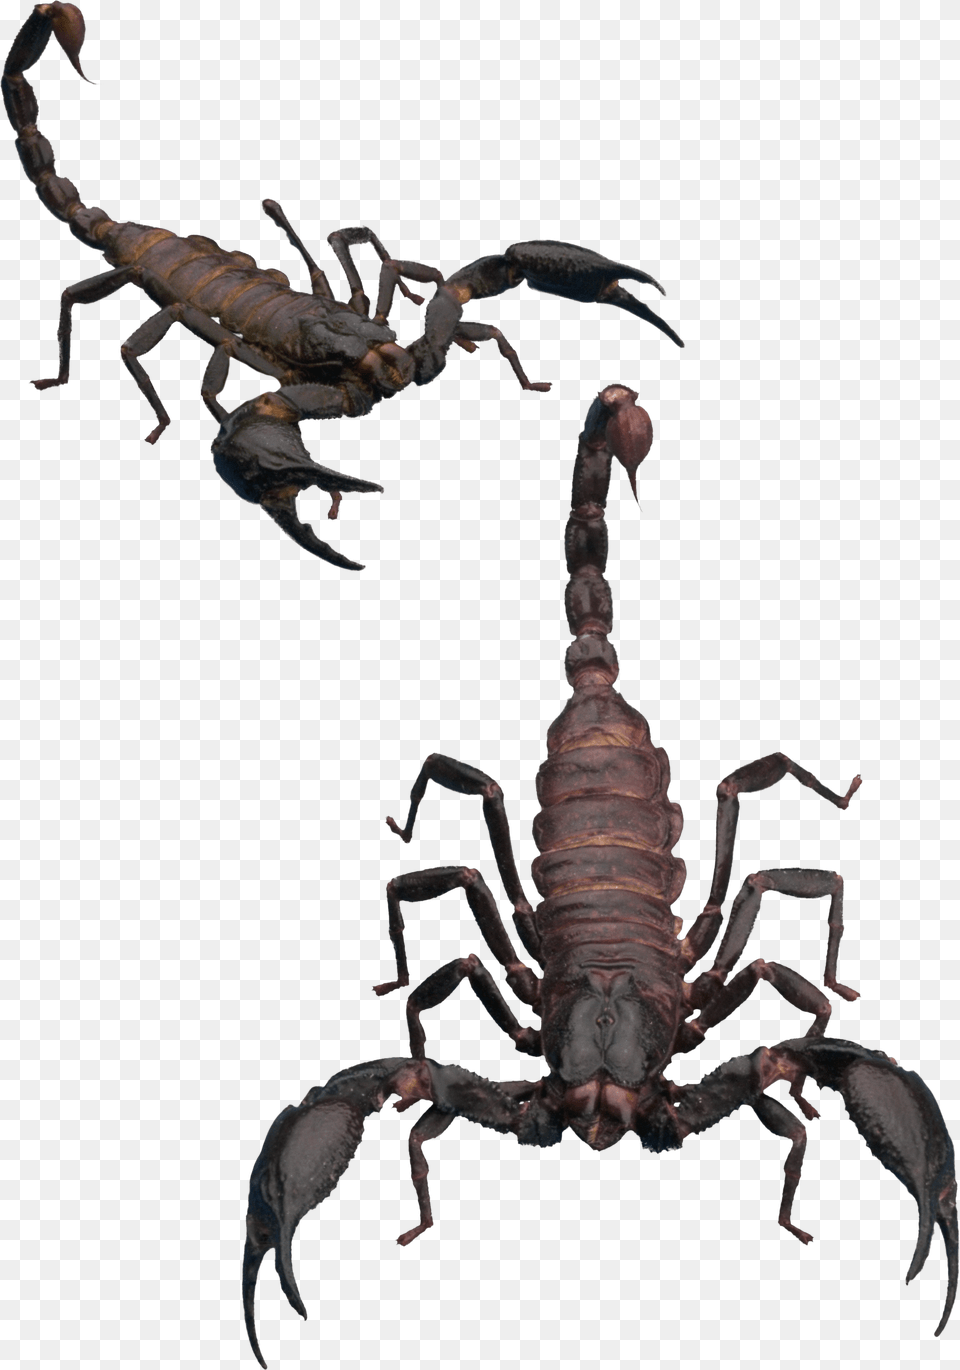 Scorpion, Animal, Invertebrate, Insect, Food Png Image